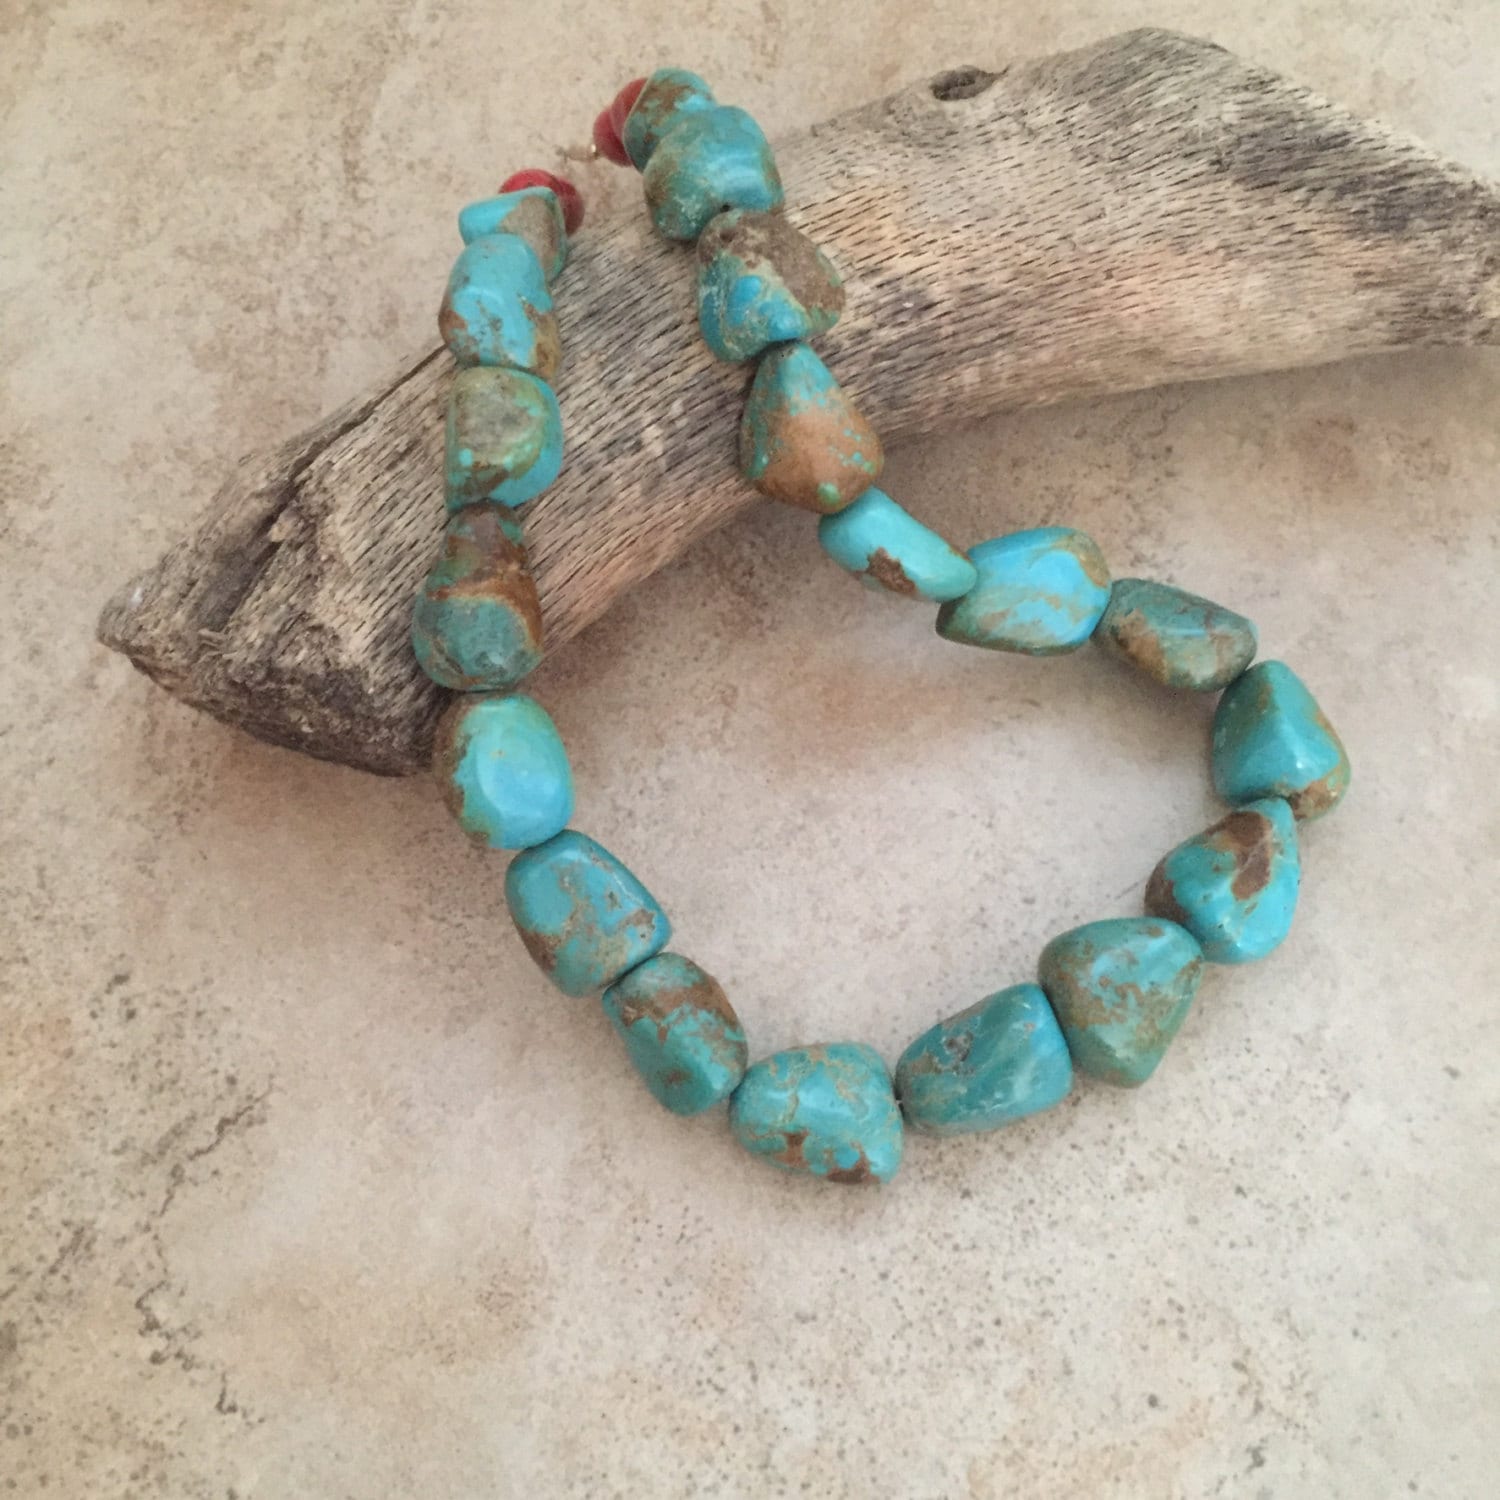 how to tell if turquoise jewelry is real